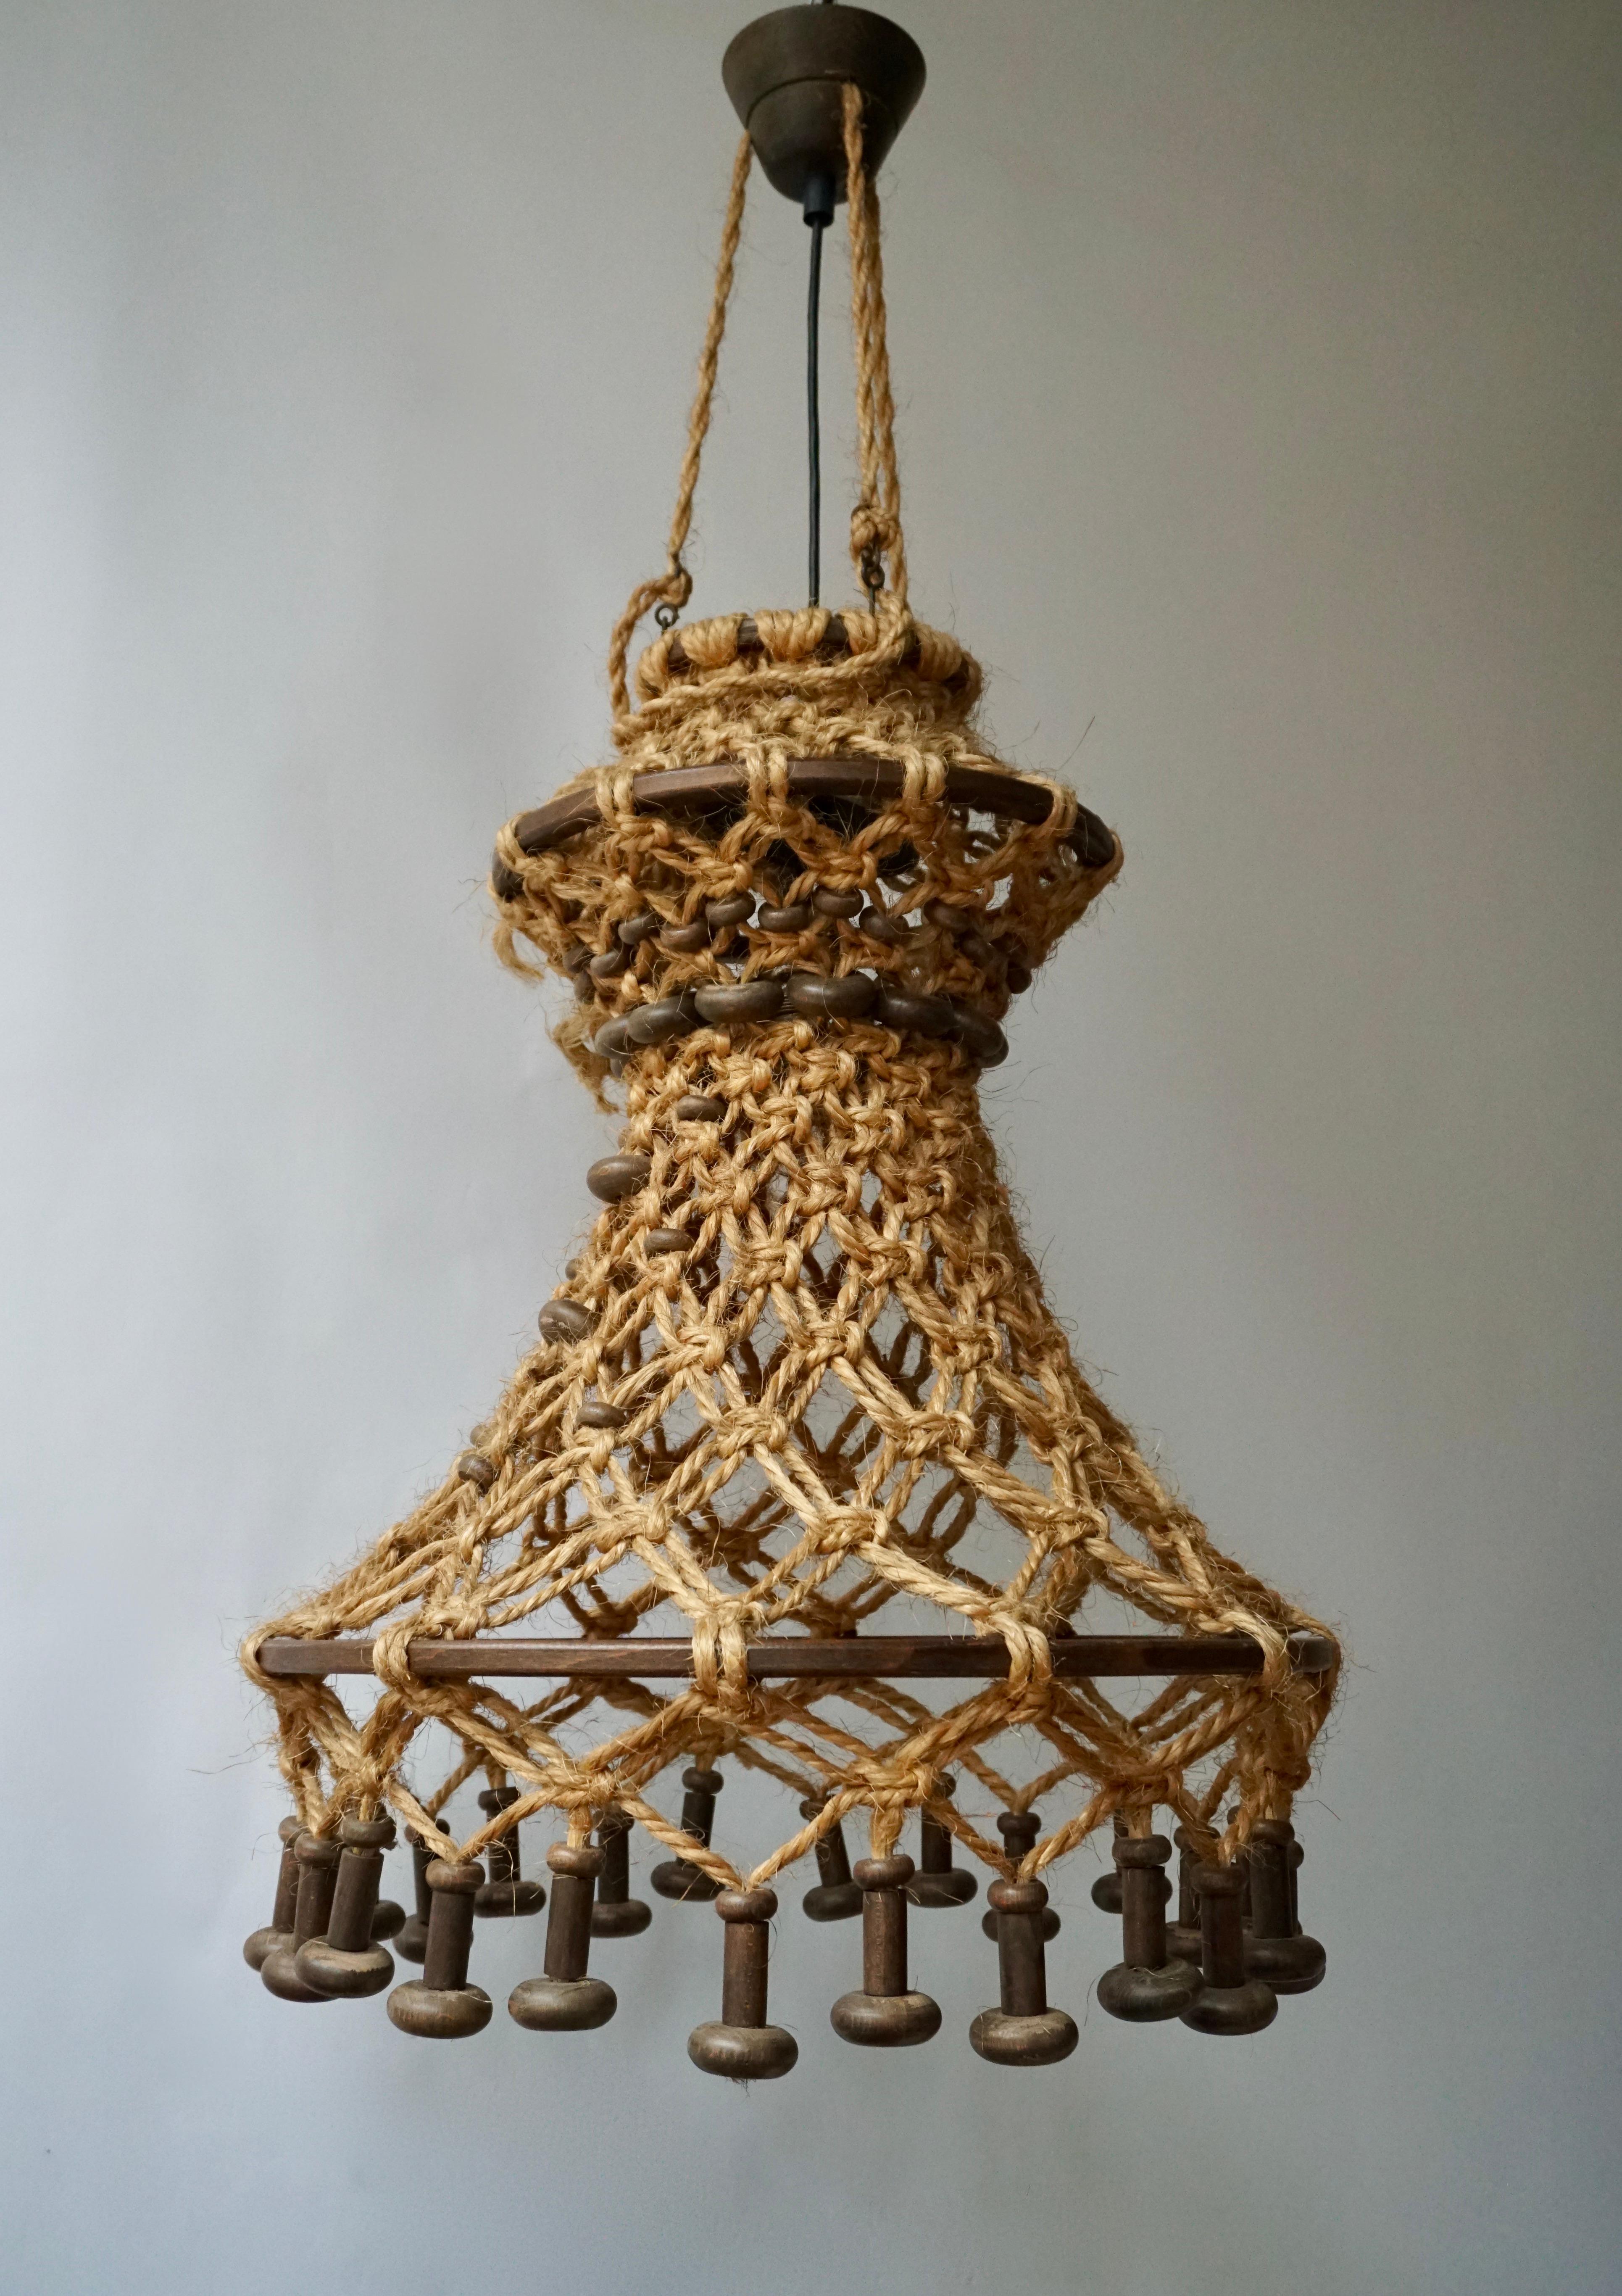 20th Century Hand Knotted Chandelier with Natural Rope and Wood